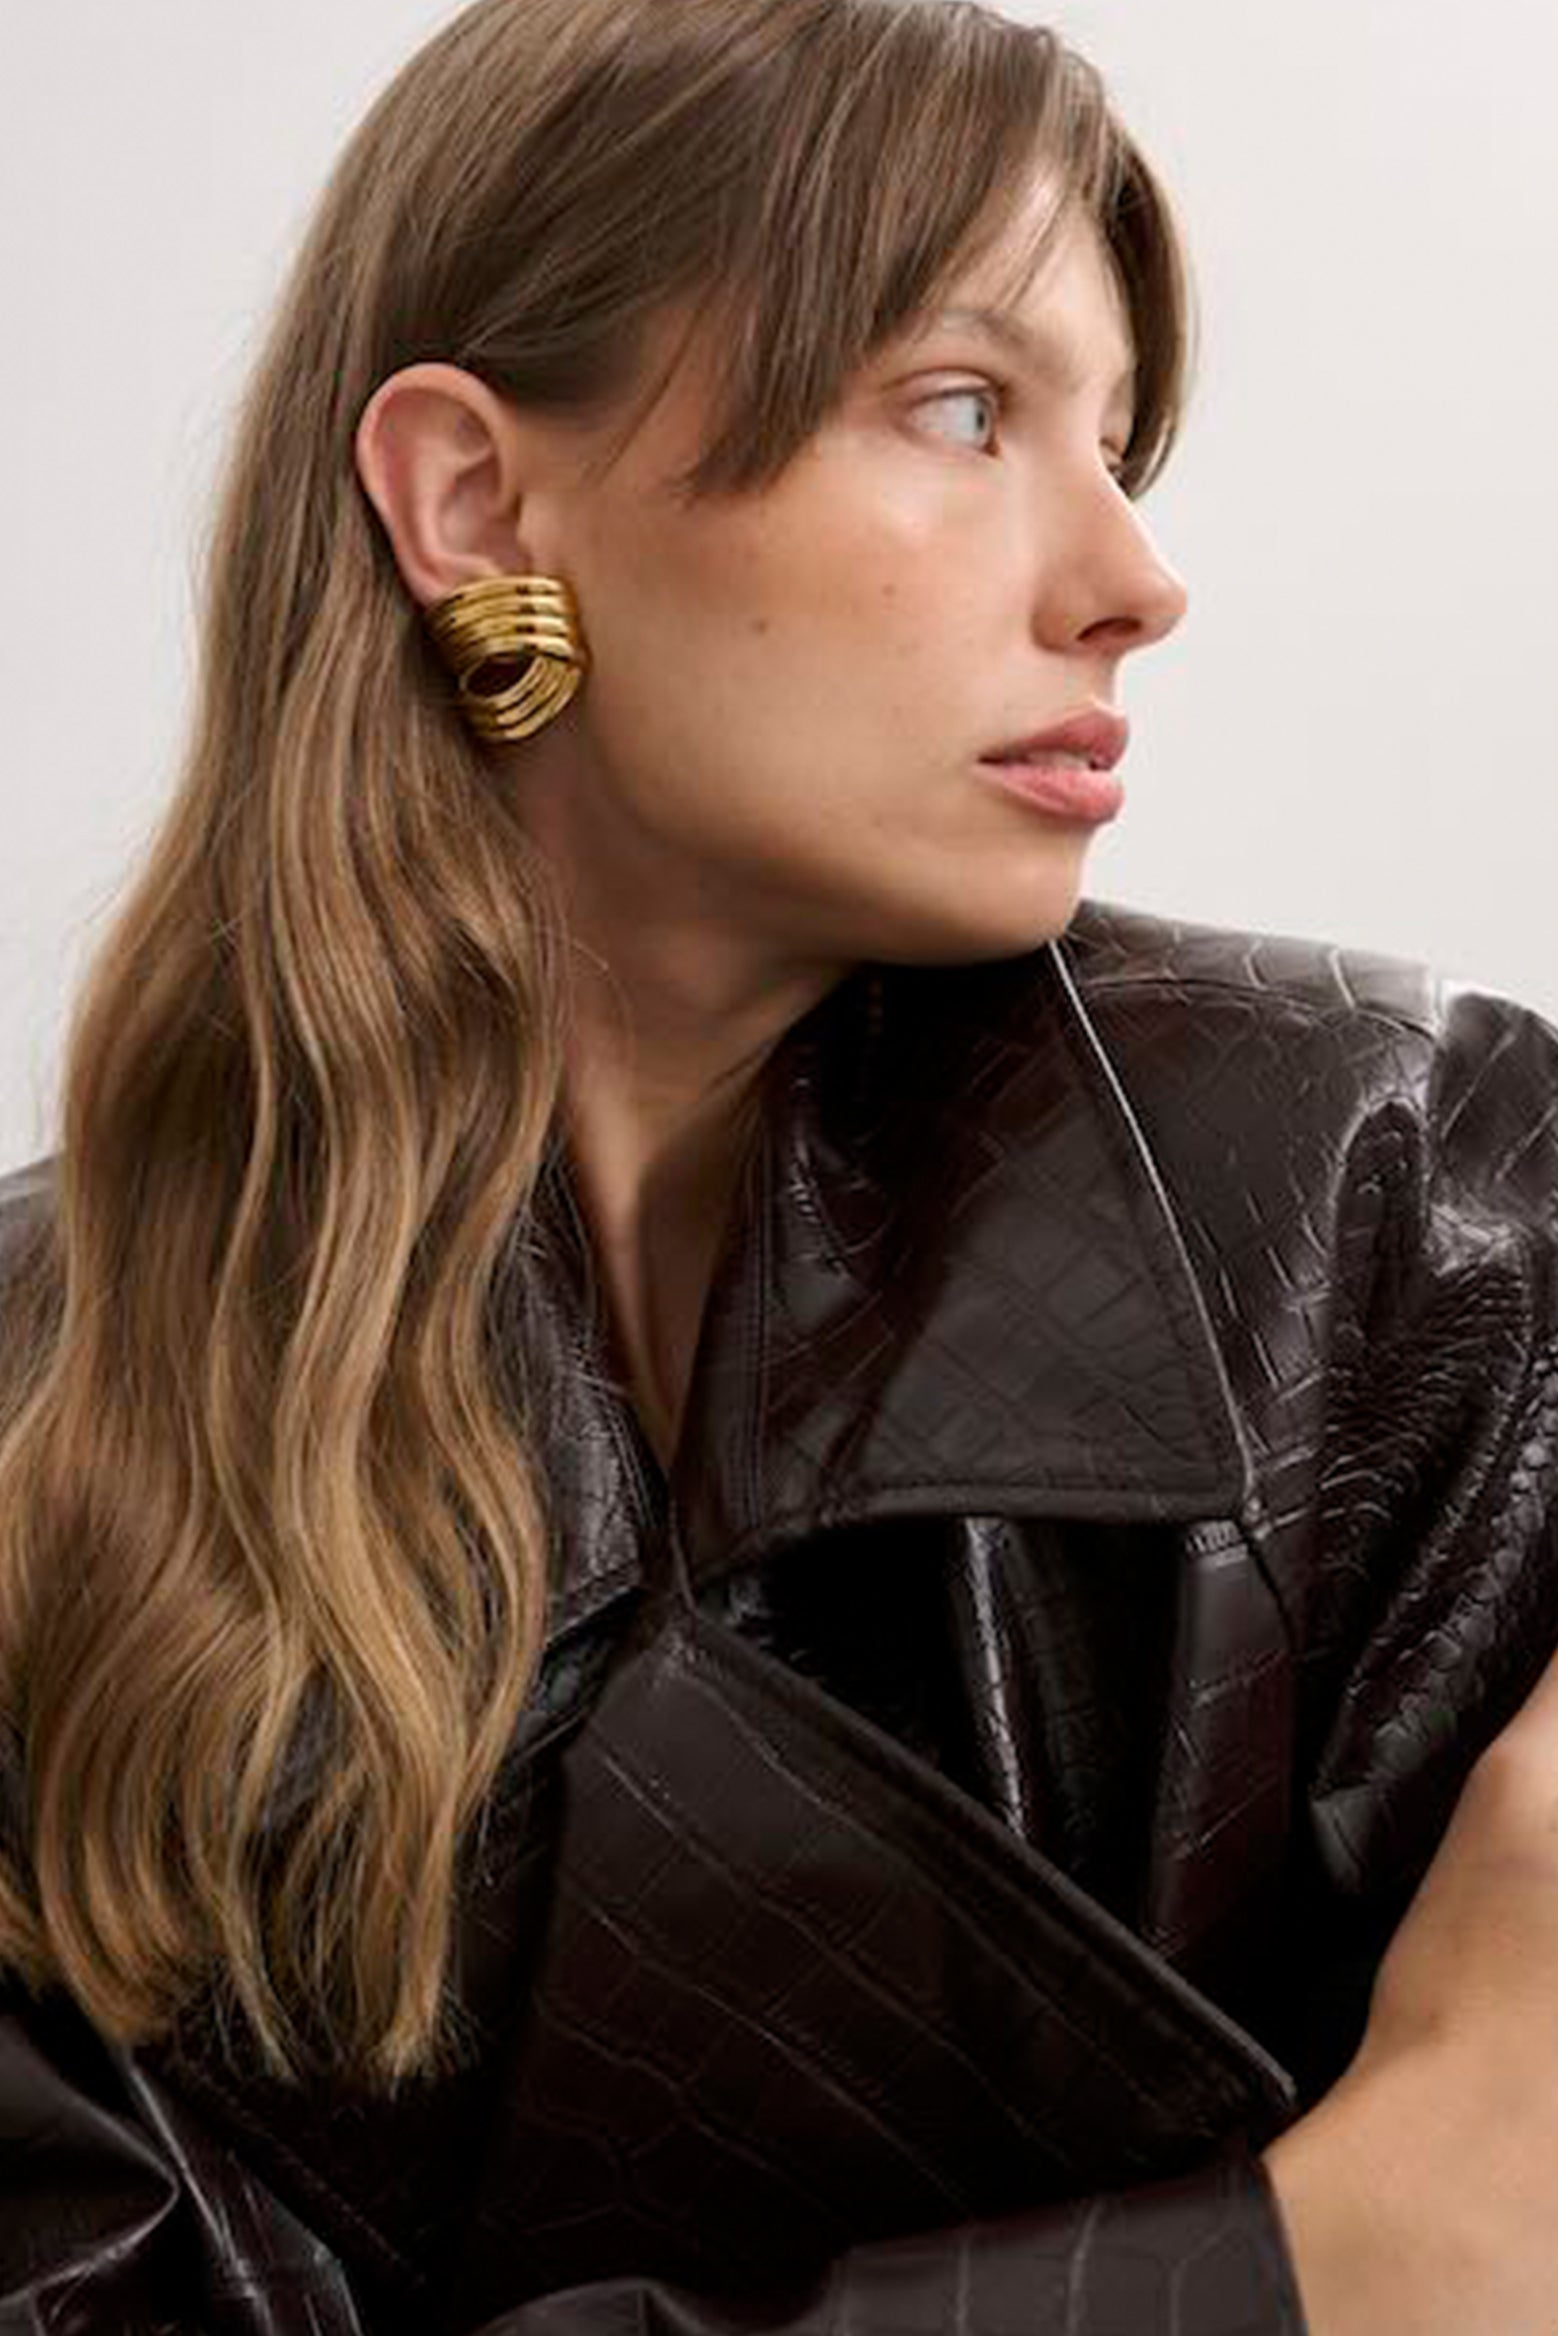 Anna Rossi Nefertiti Earring in Gold available at The New Trend Australia.